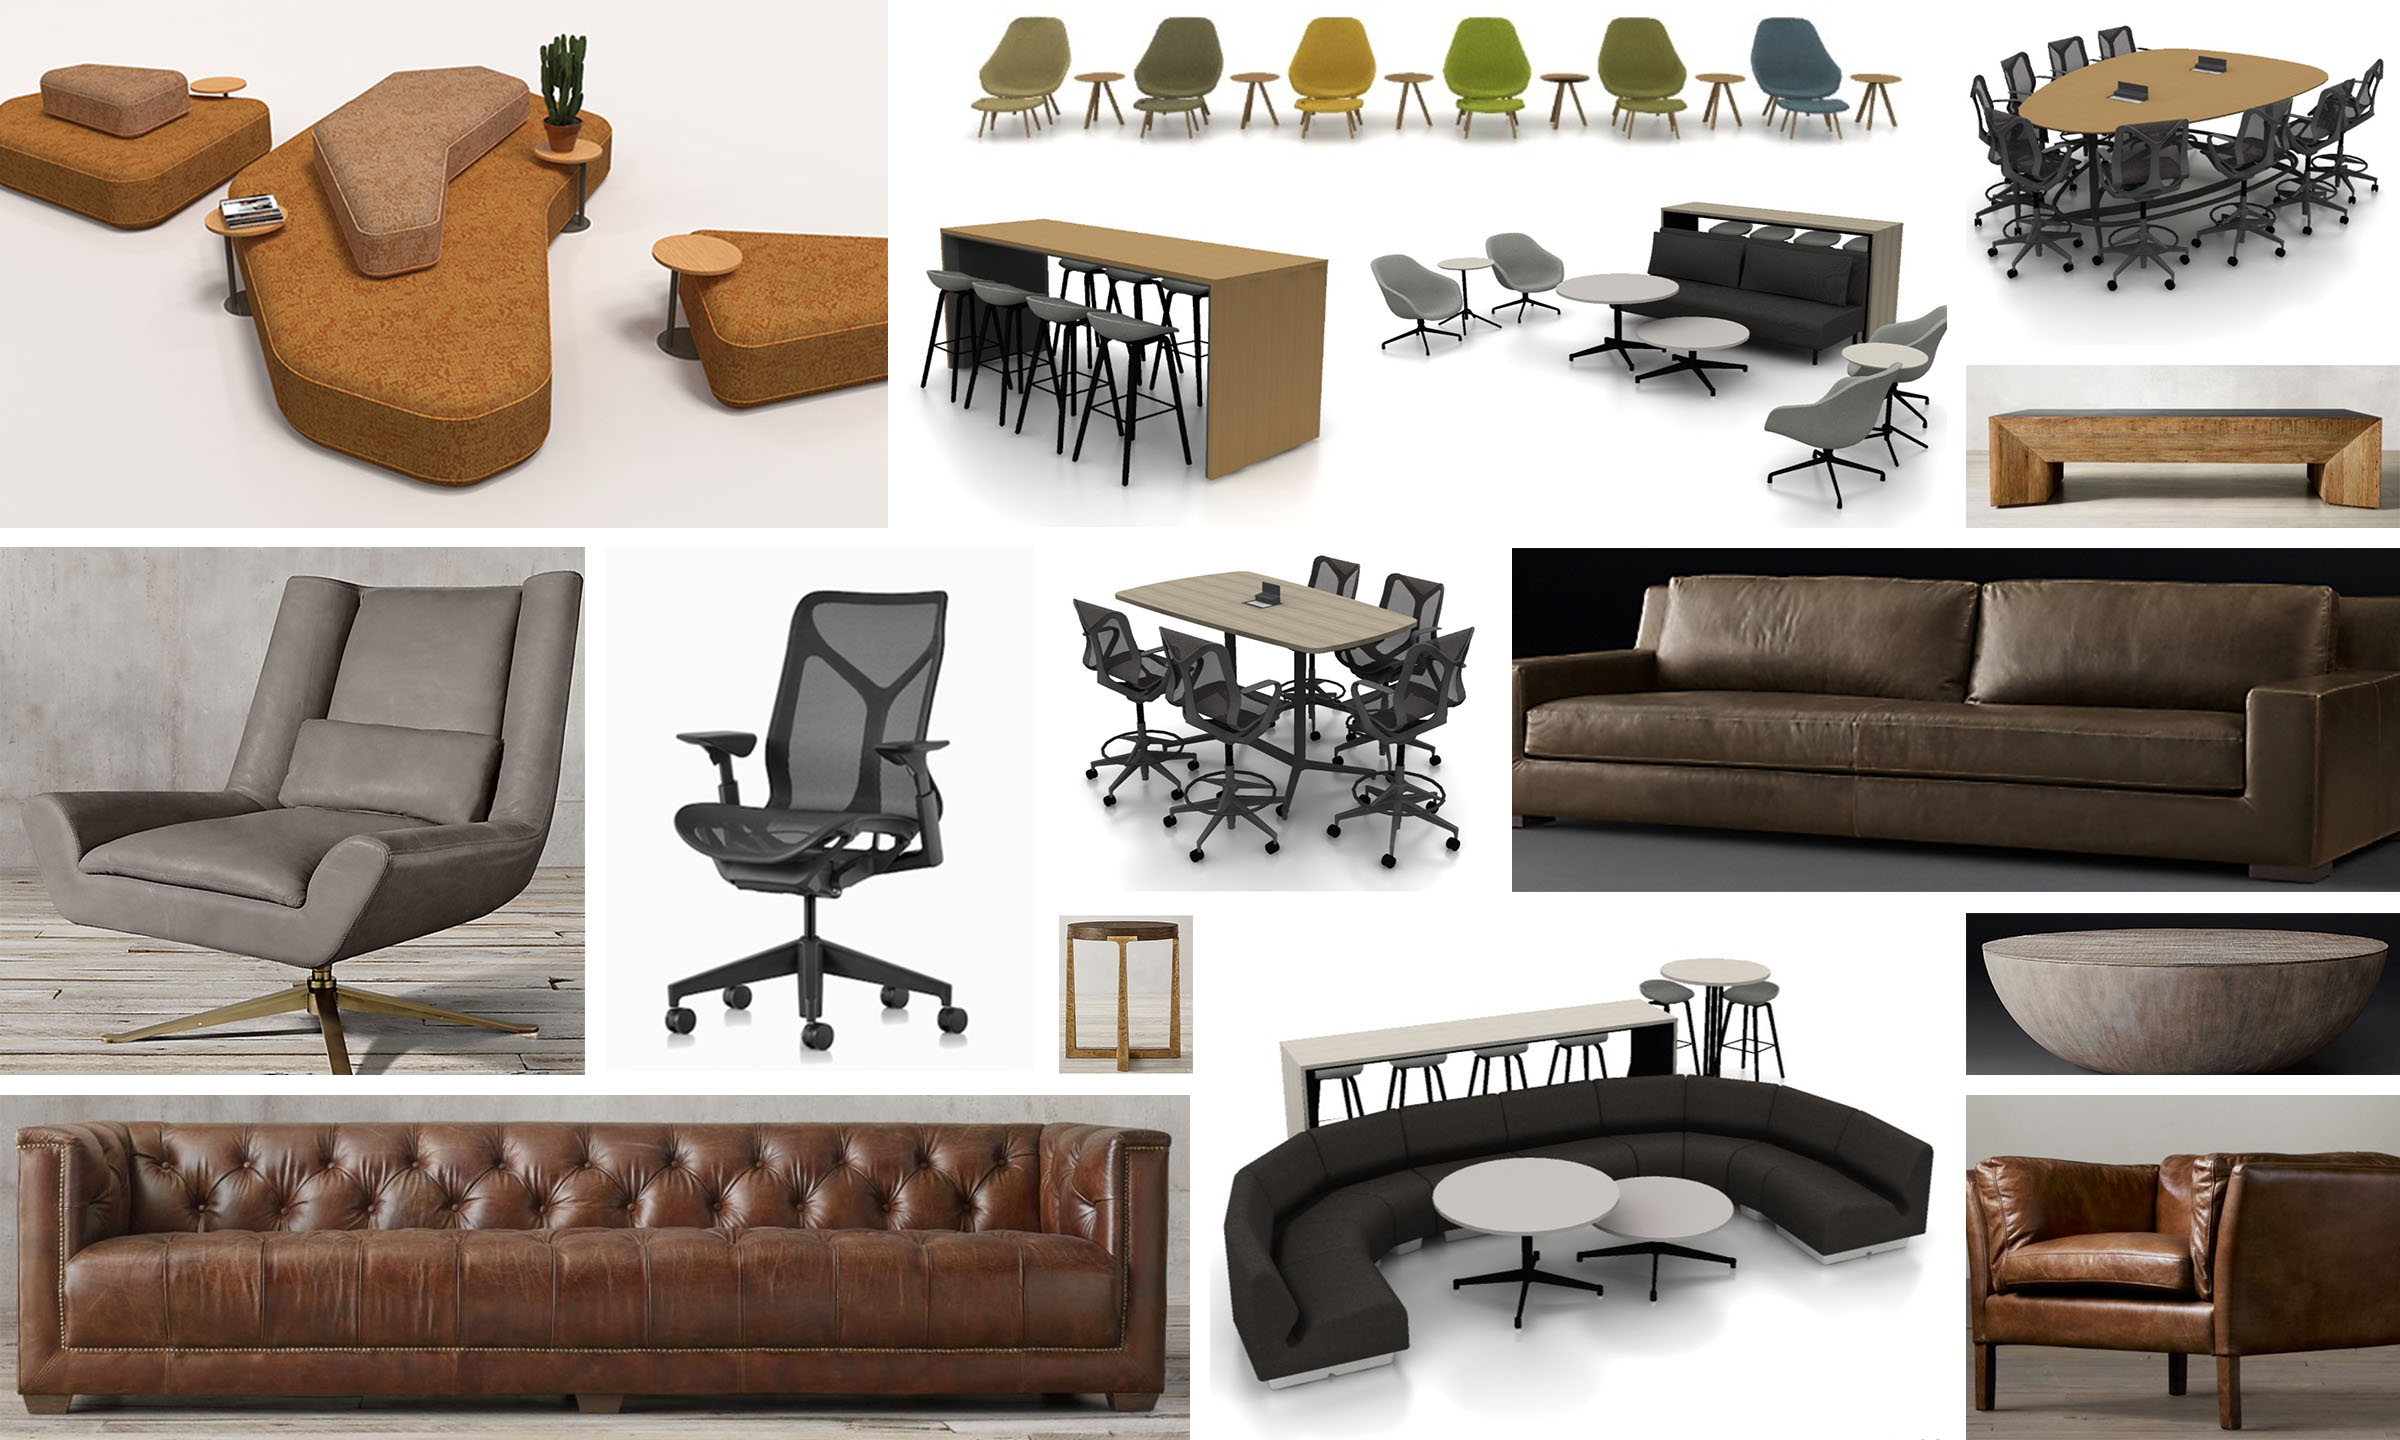 A collage of images showing the type of furniture in our Franklinton campus.